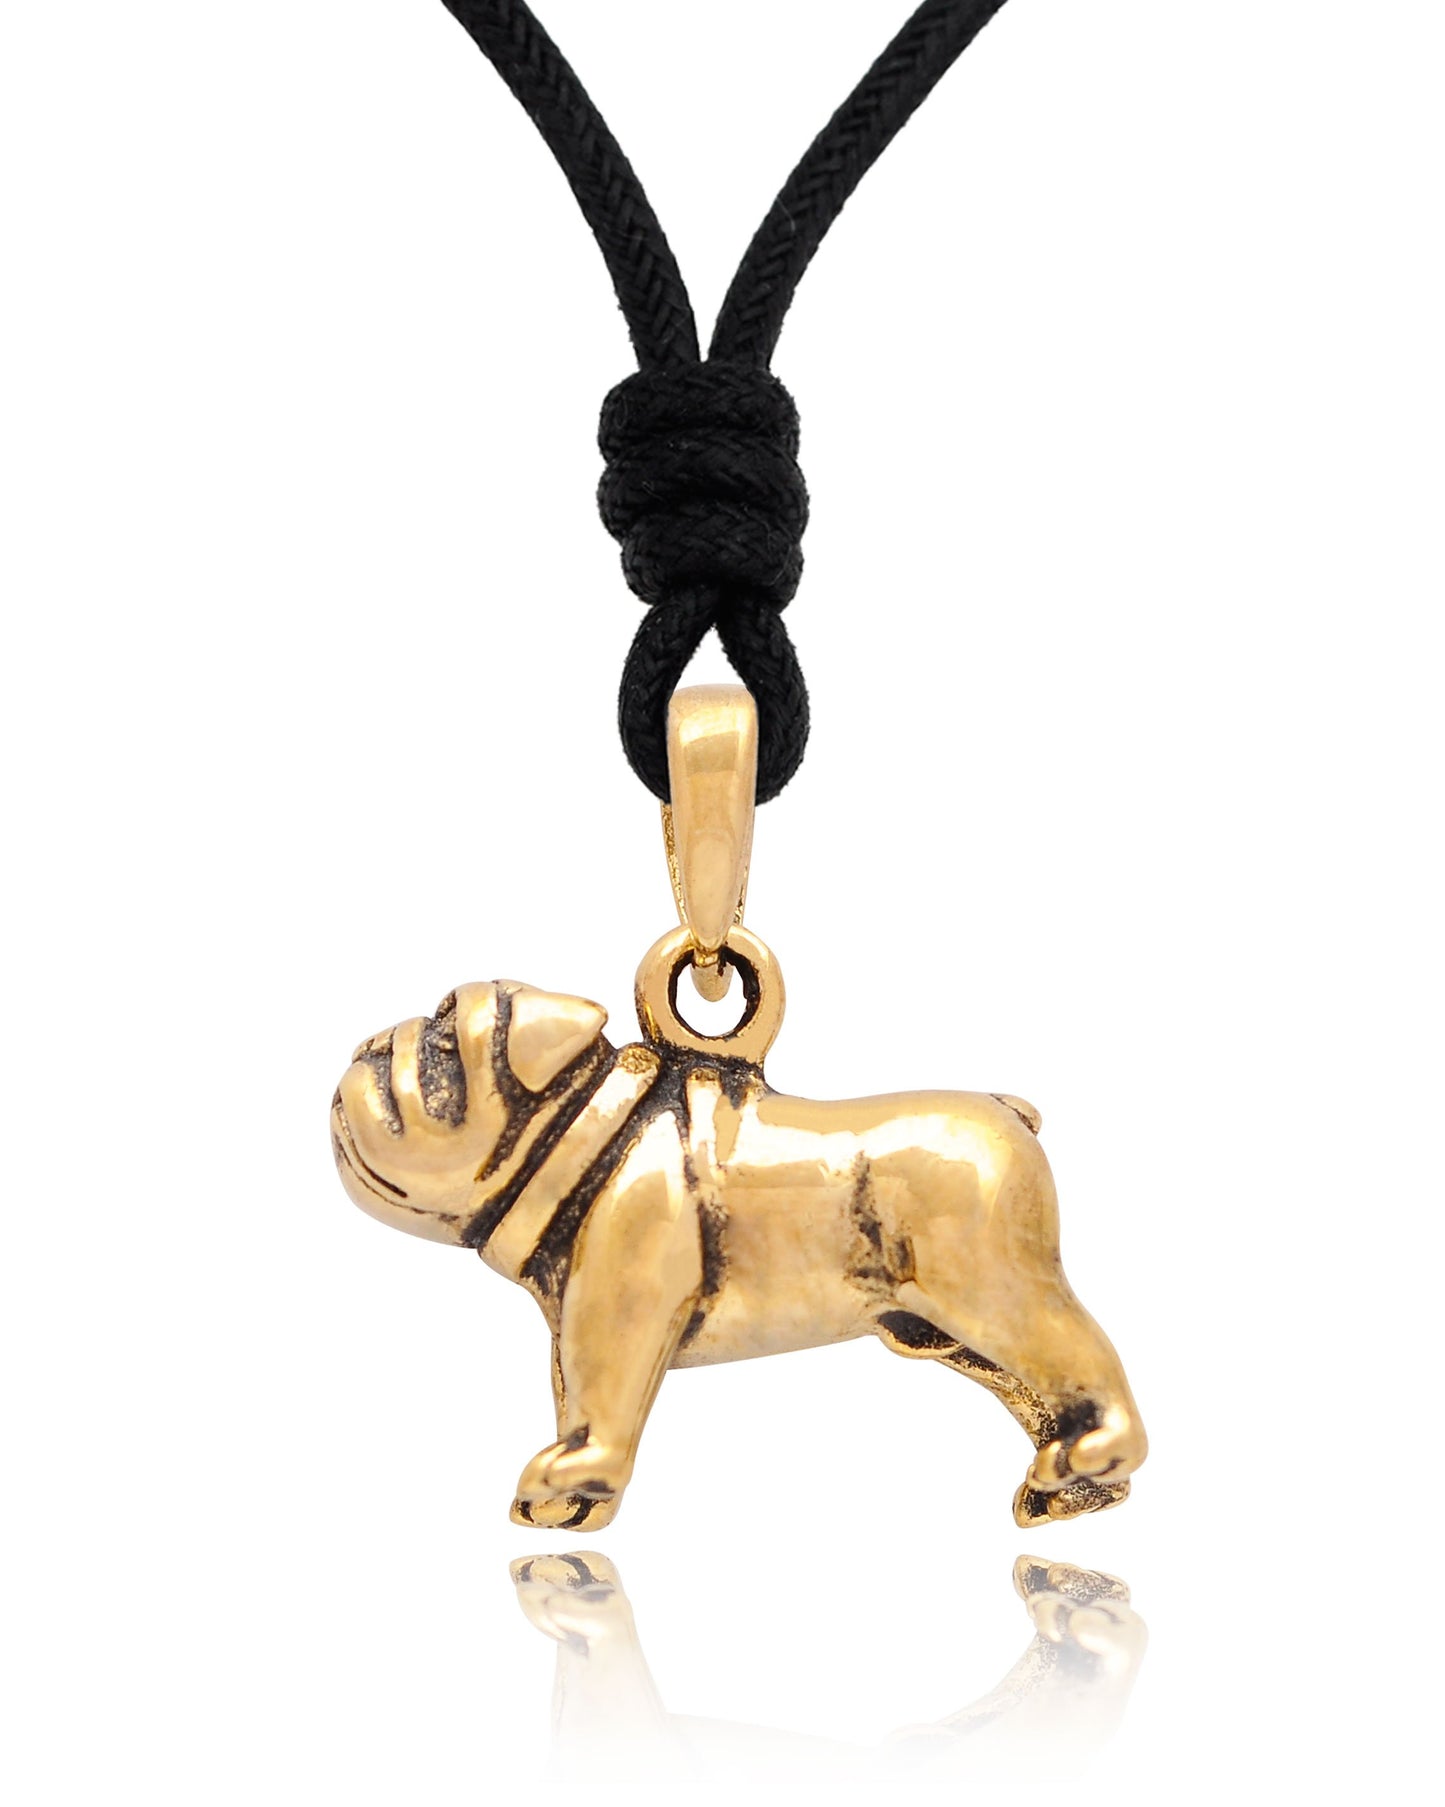 Mini Cute Pug 92.5 Sterling Silver Charm Necklace Pendant Jewelry